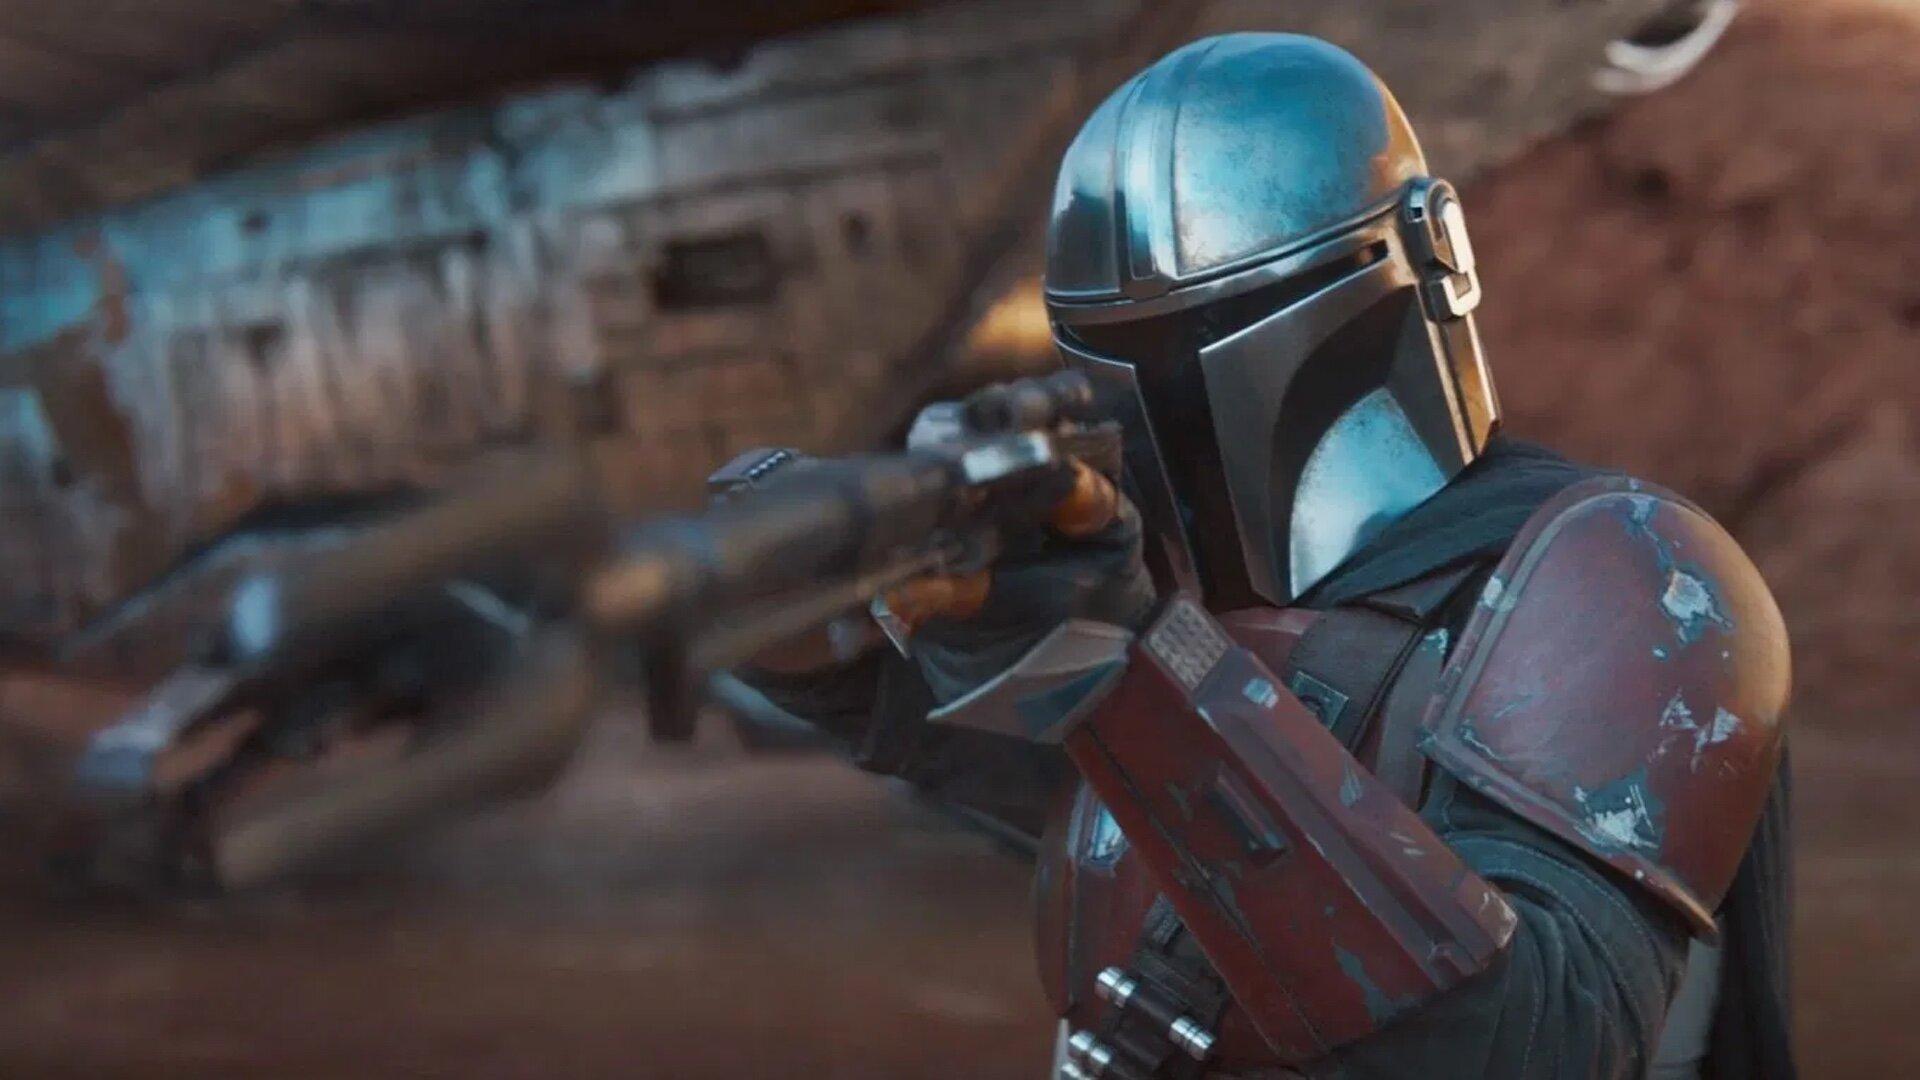 THE MANDALORIAN Could Possibly Get the Feature Film